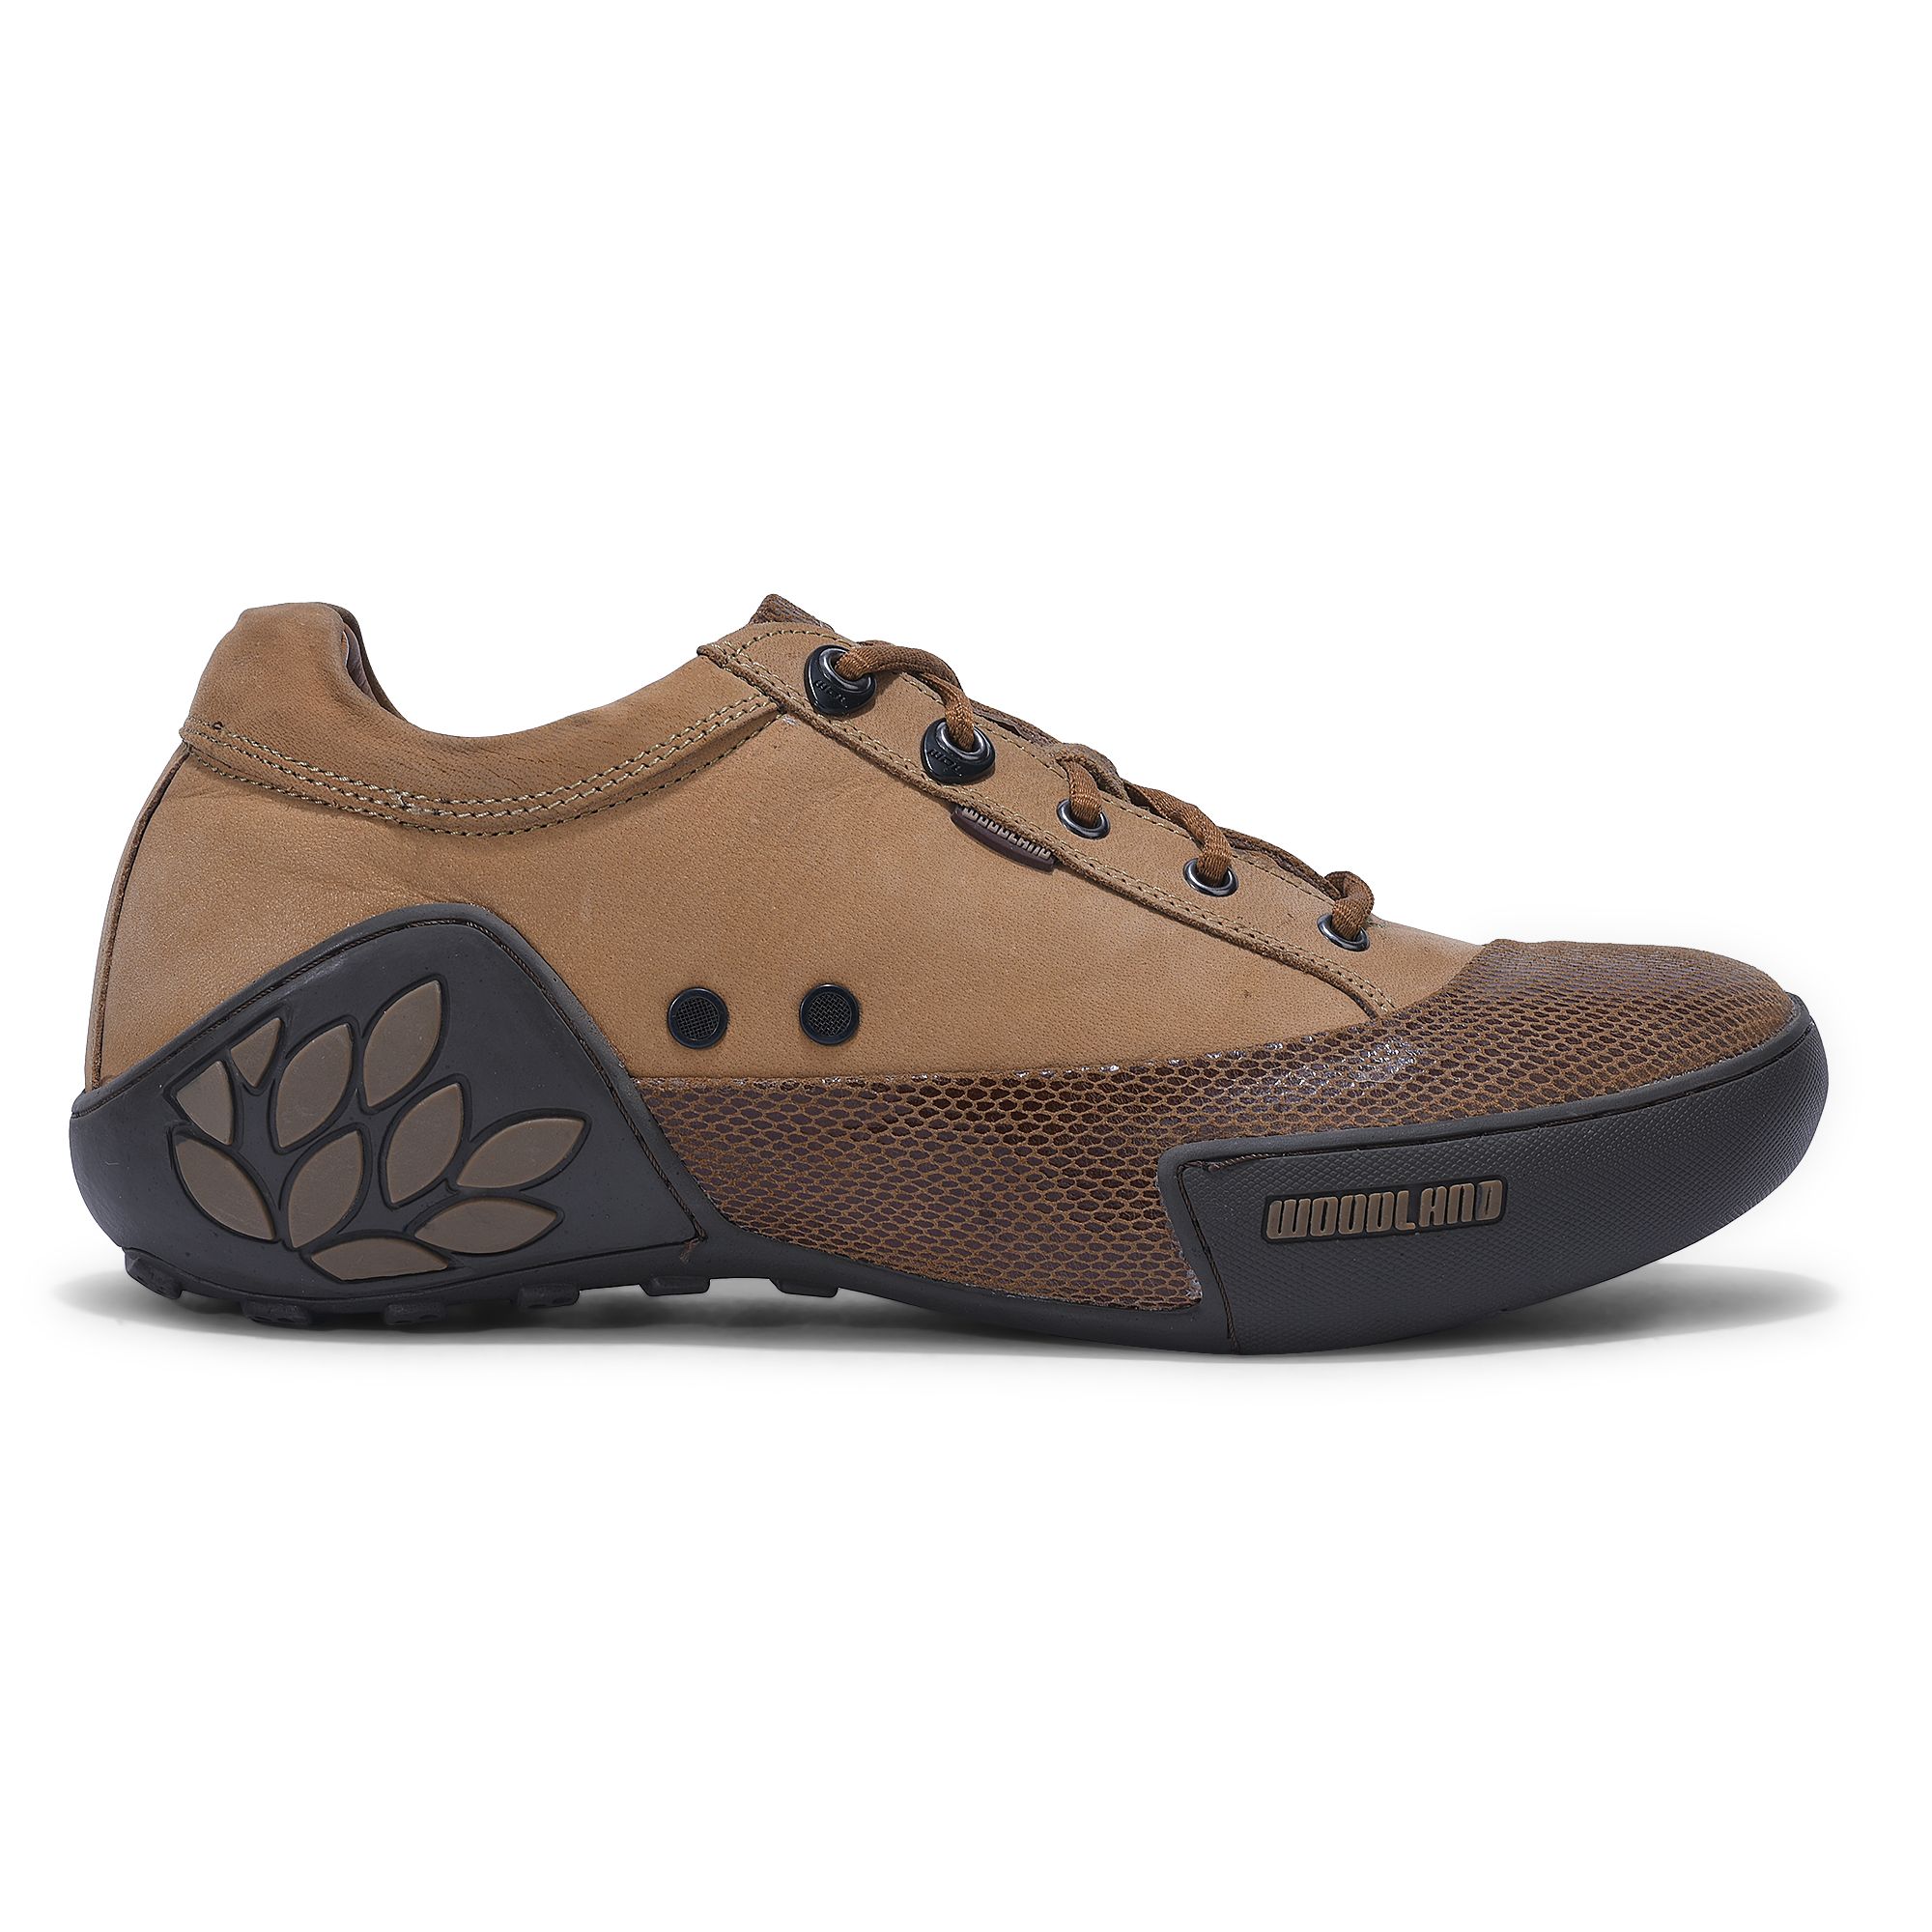 Woodland CAMEL casual shoes